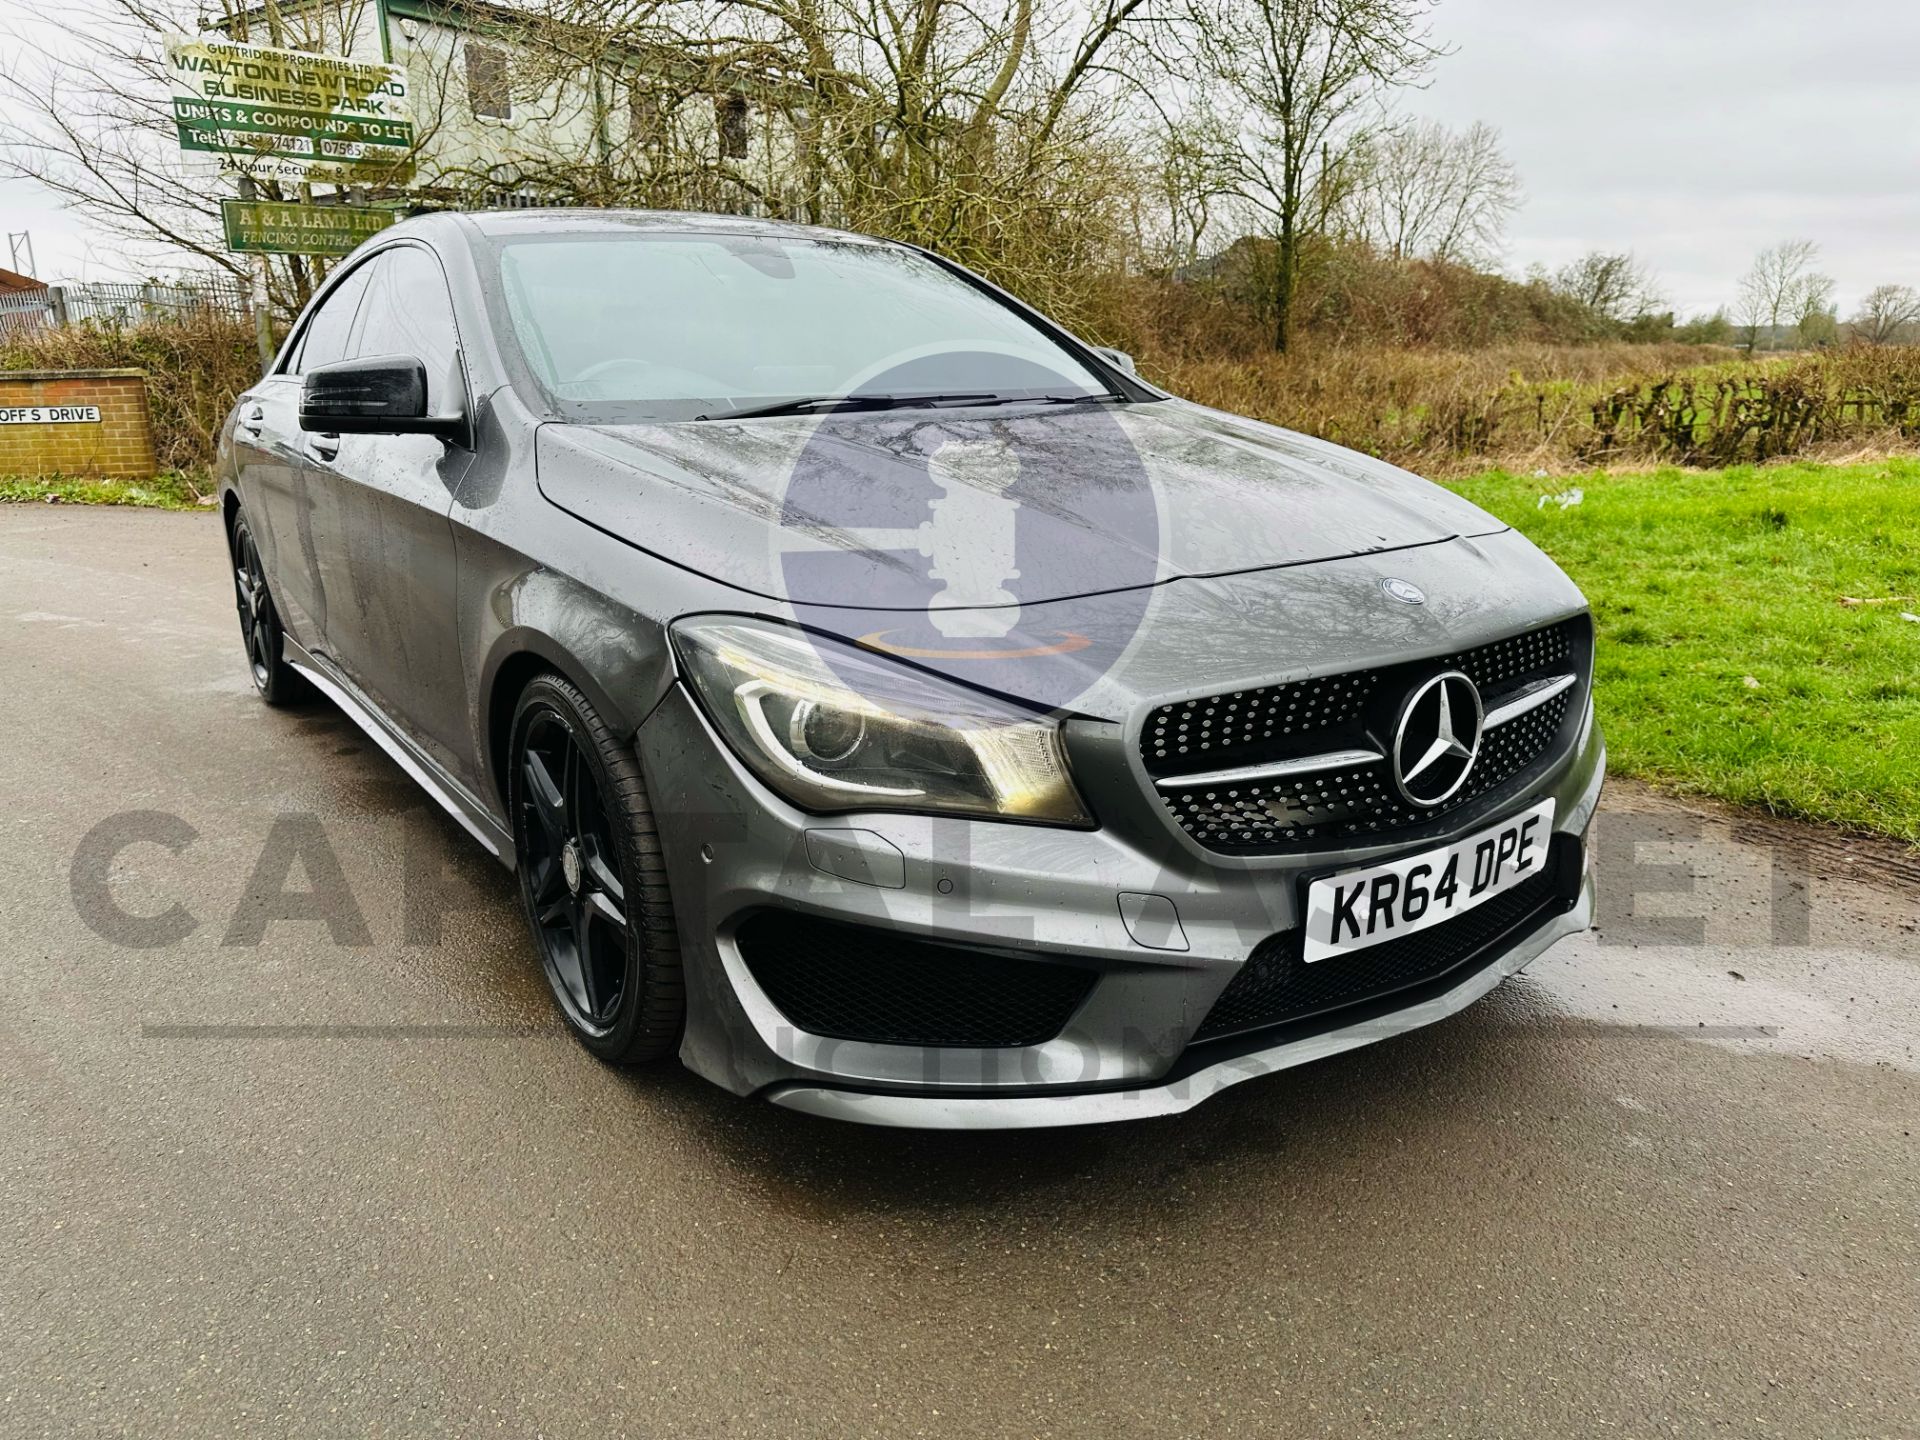 (ON SALE) MERCEDES-BENZ CLA 220 CDI *AMG SPORT* (7G - DCT AUTOMATIC) - 2015 MODEL - SERVICE HISTORY - Image 2 of 33